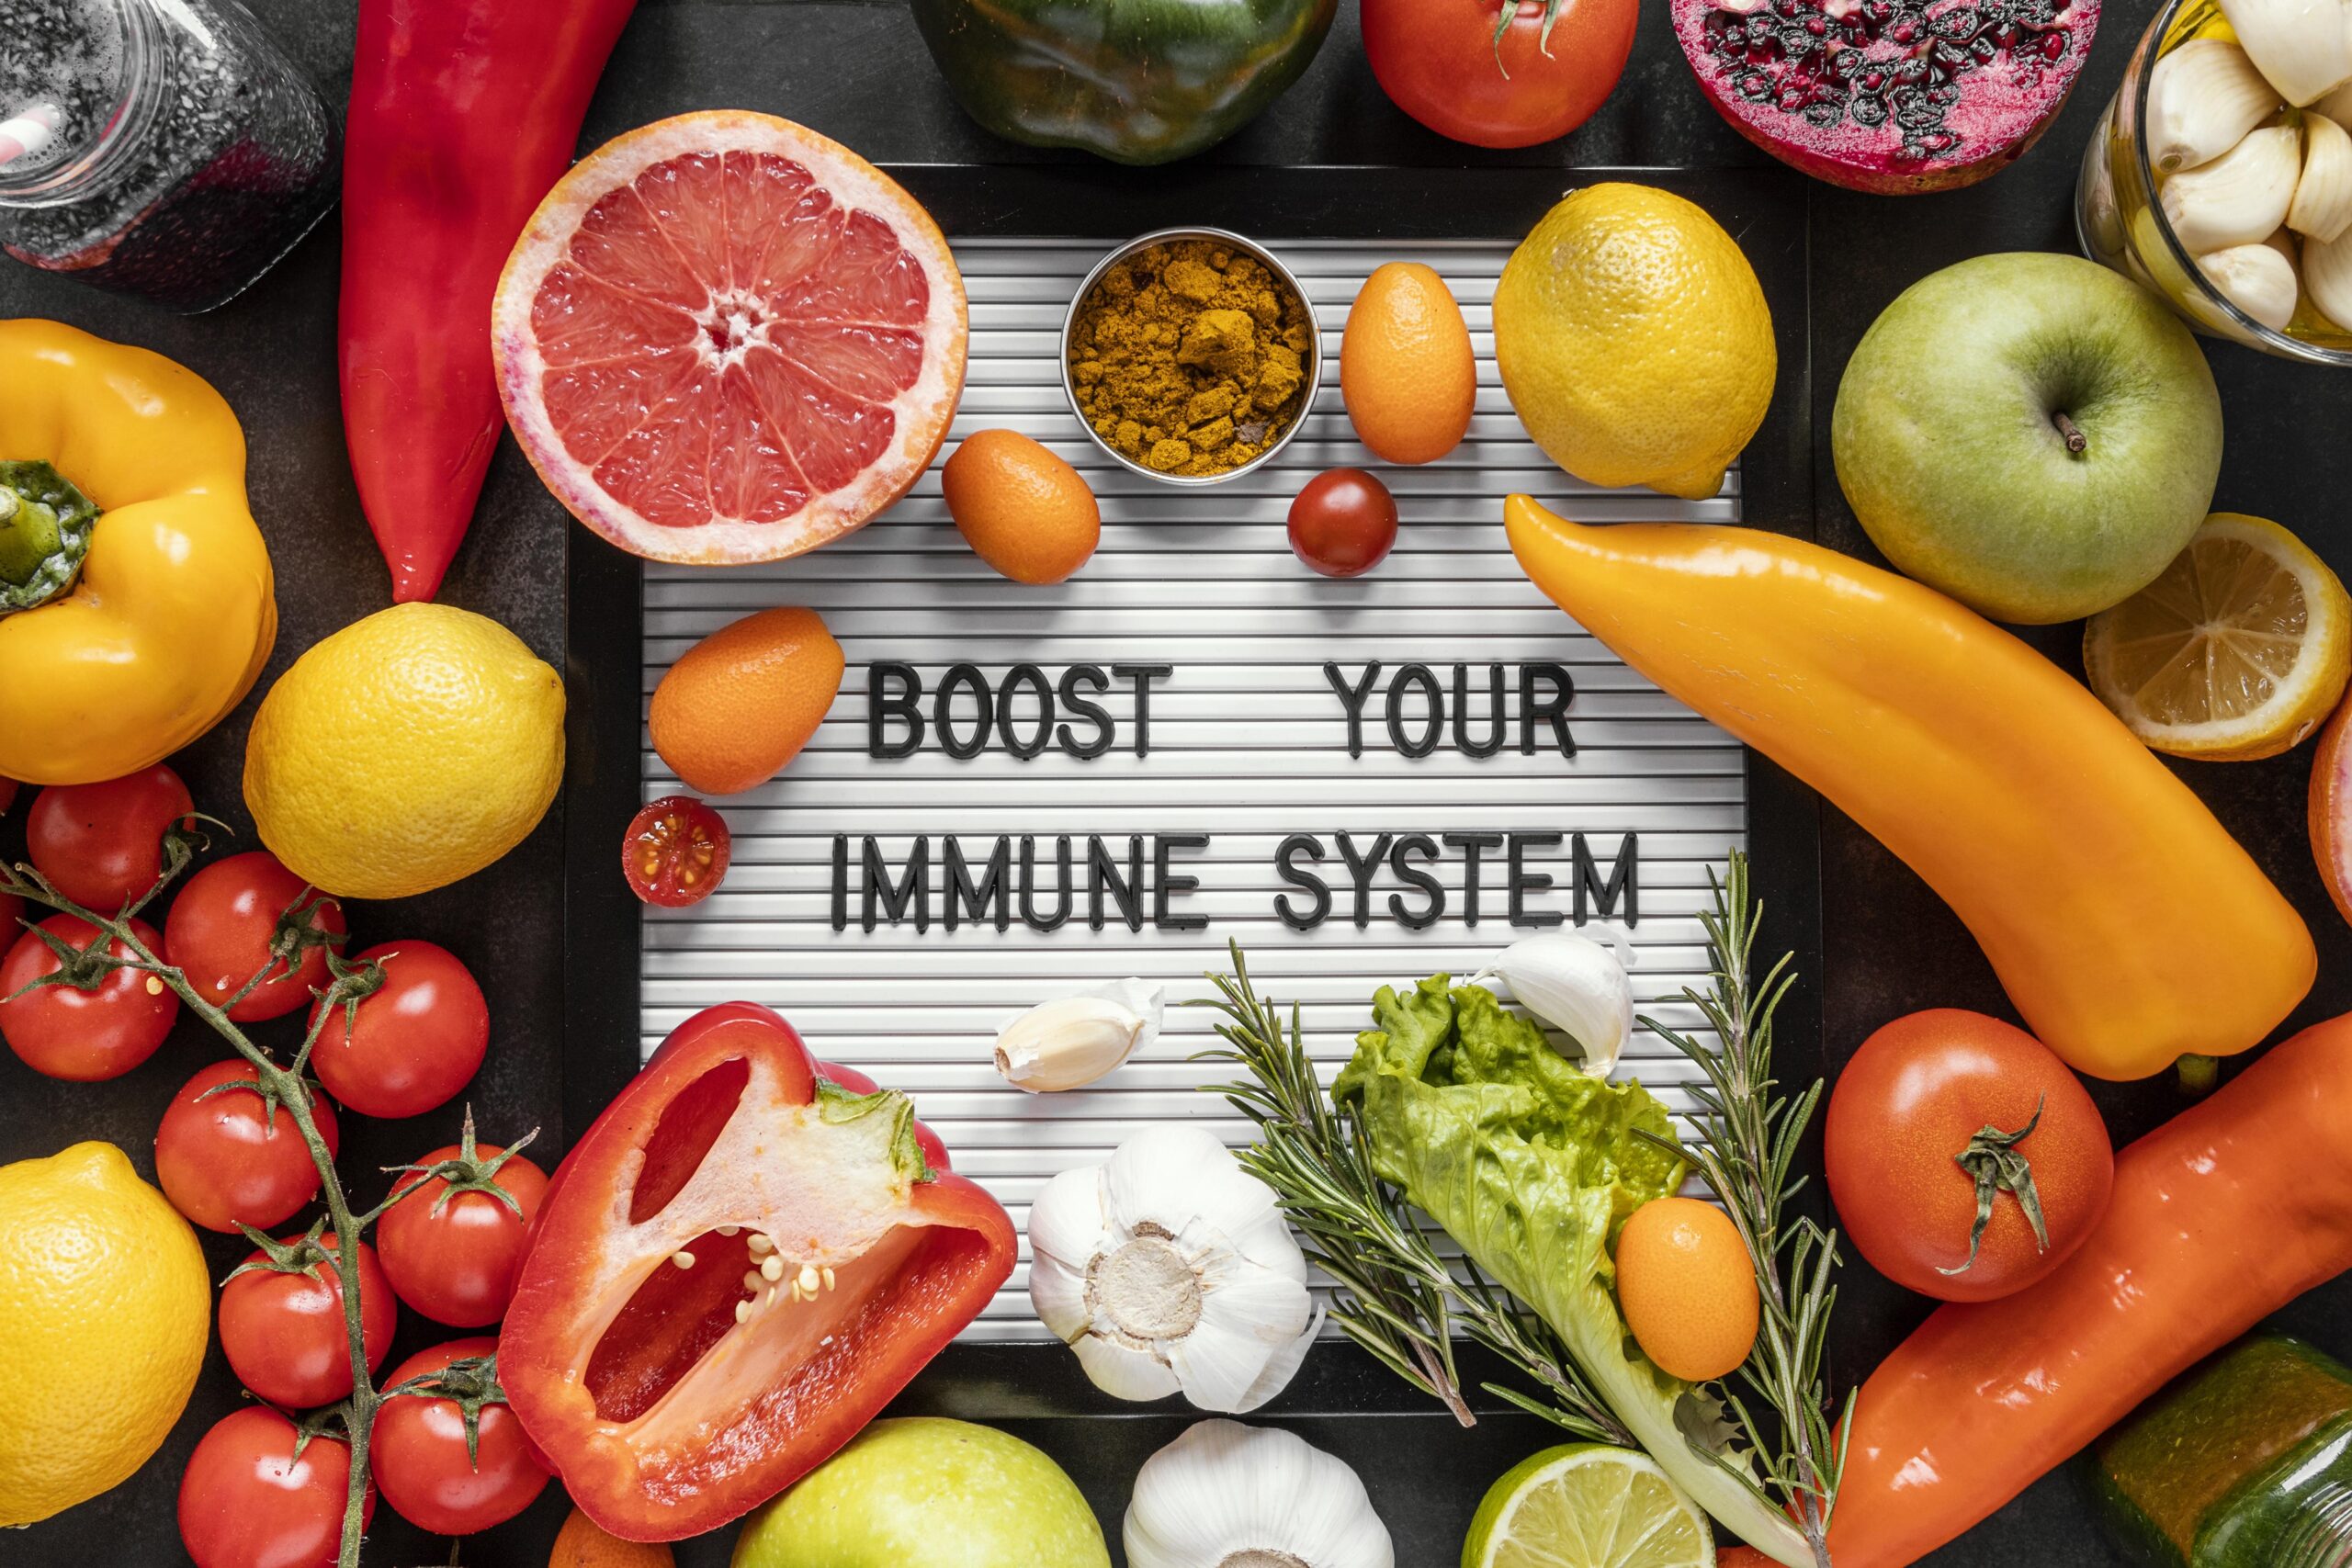 Boost your immune system